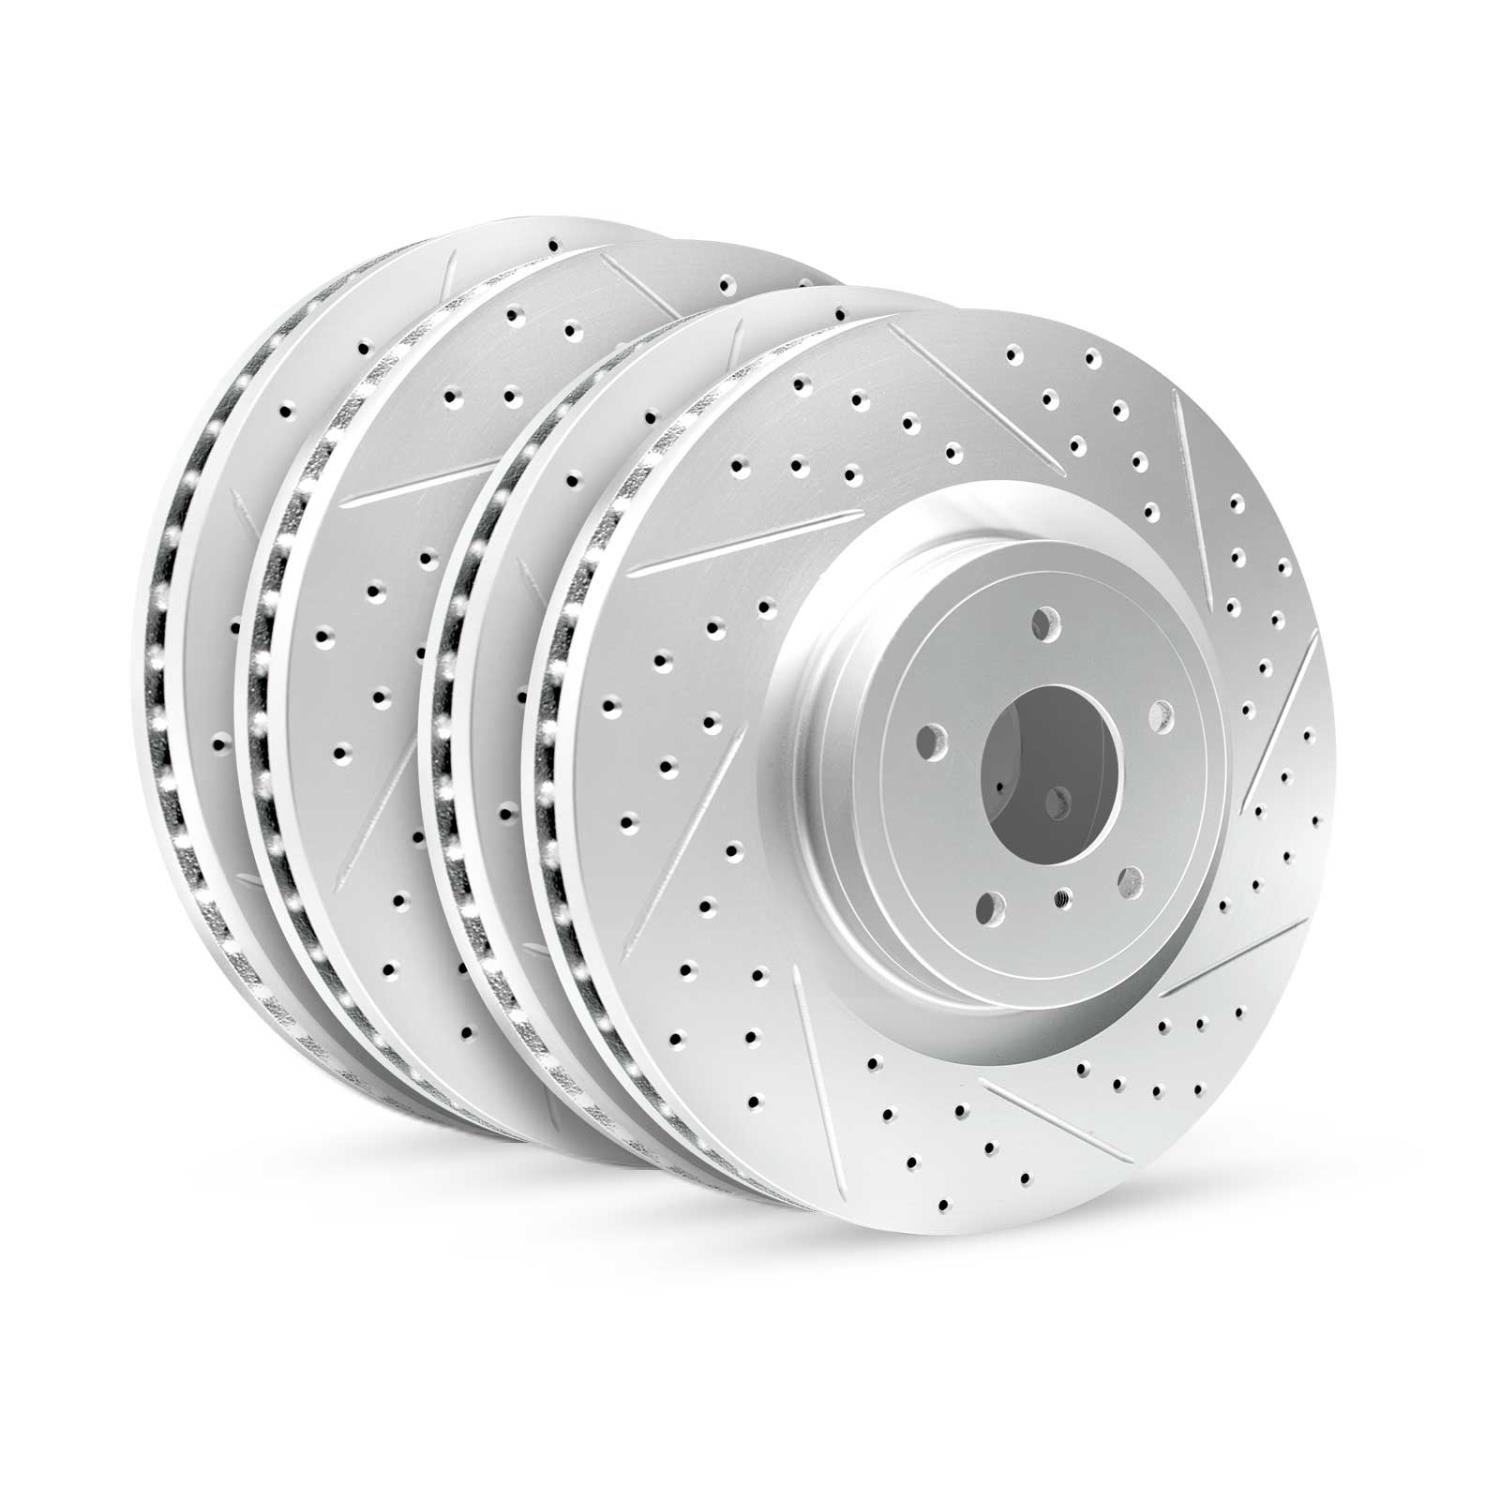 GEO-Carbon Drilled/Slotted Rotors, 2019-2021 Infiniti/Nissan, Position: Front/Rear